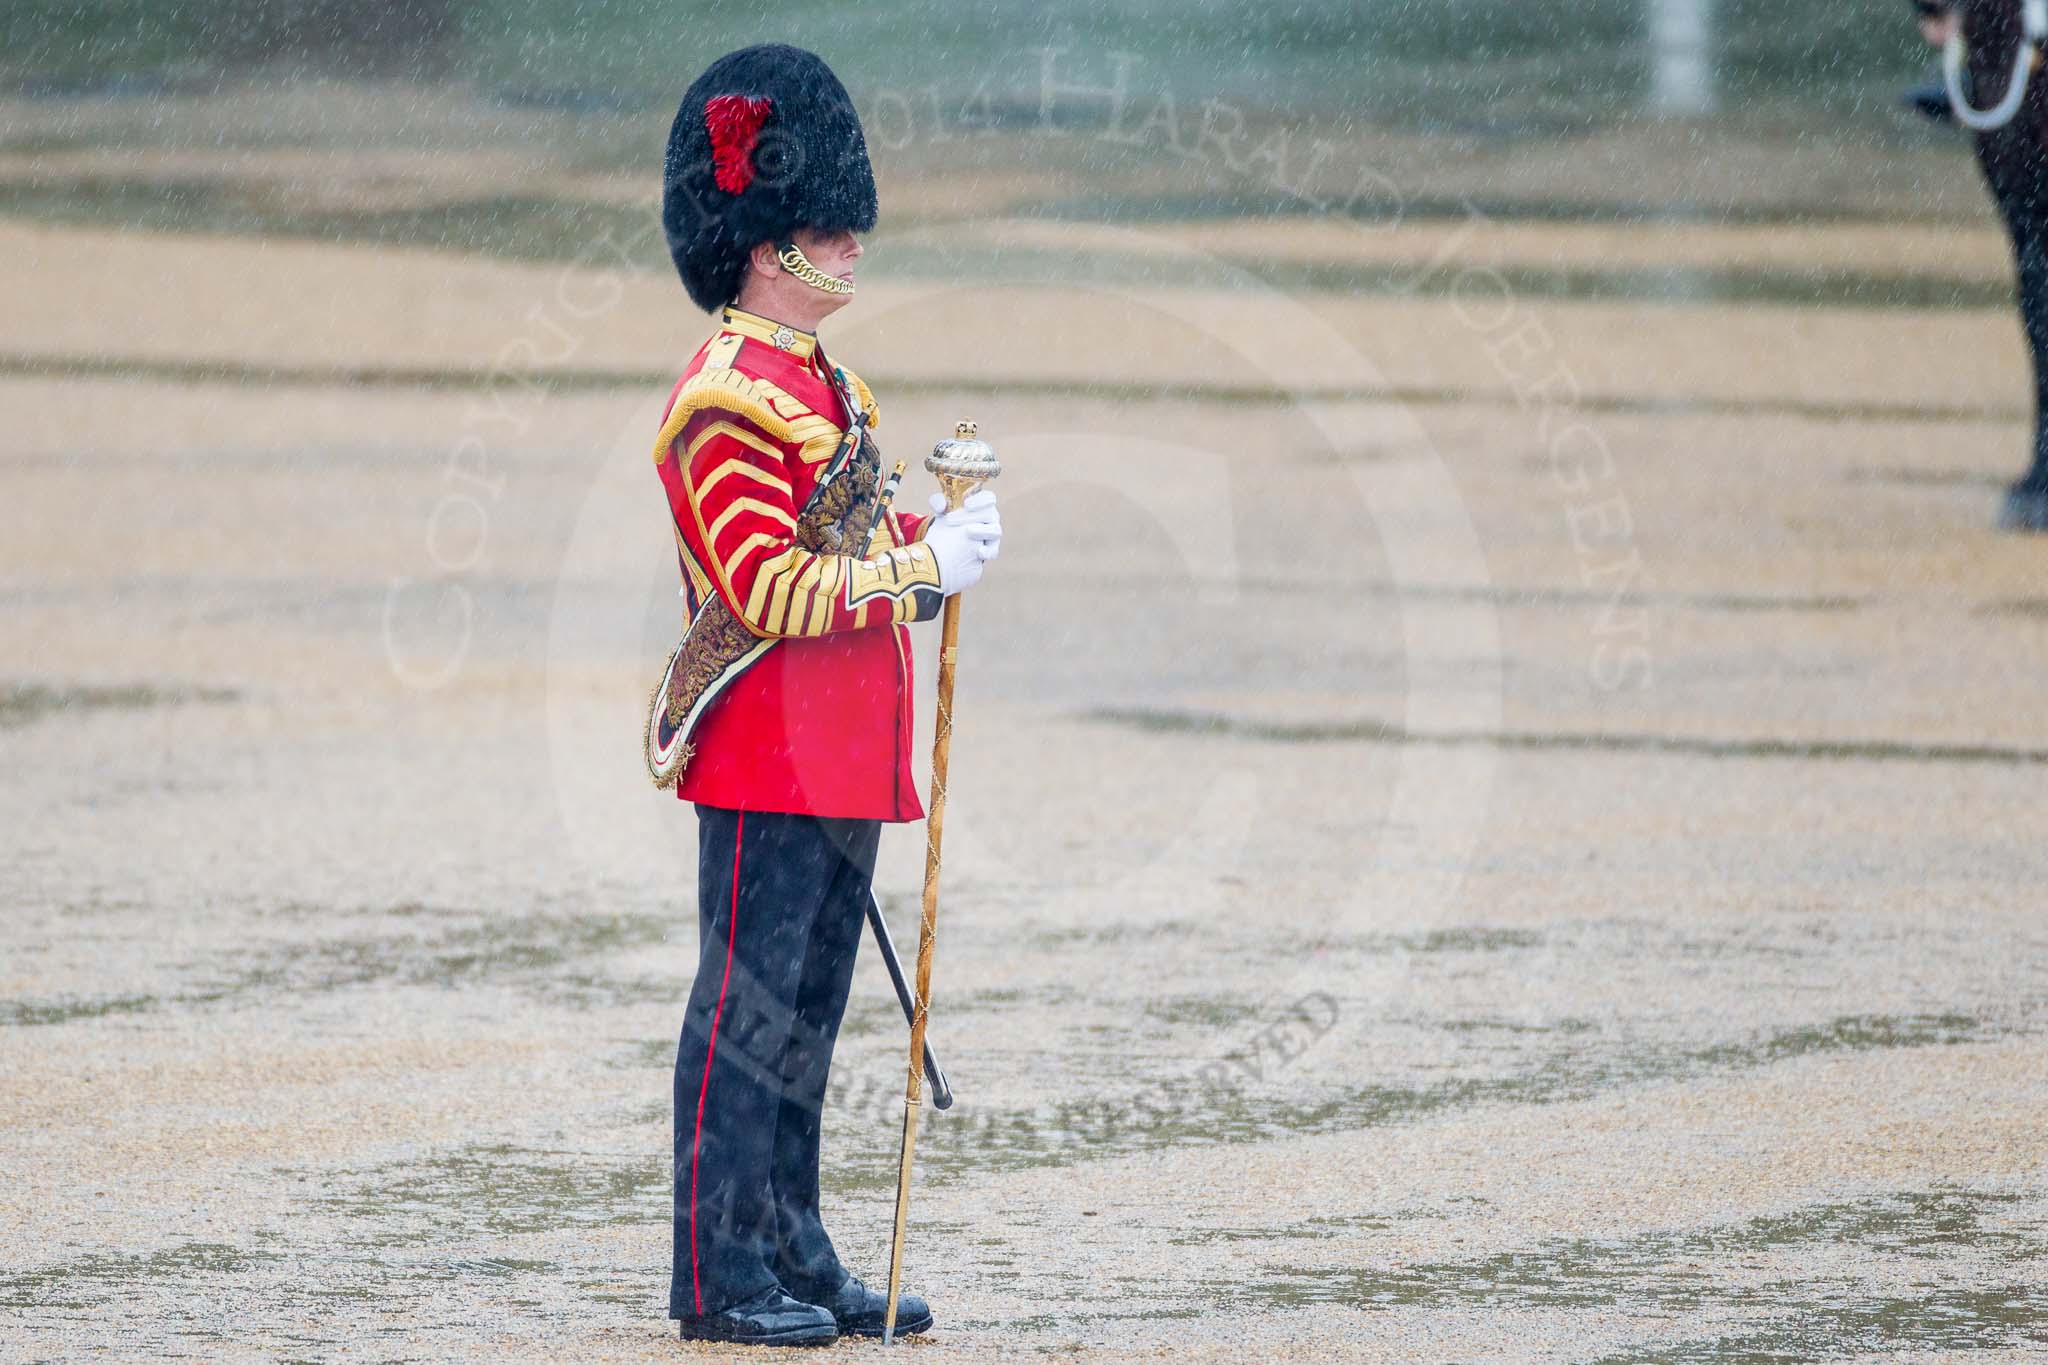 The Colonel's Review 2014.
Horse Guards Parade, Westminster,
London,

United Kingdom,
on 07 June 2014 at 10:45, image #185